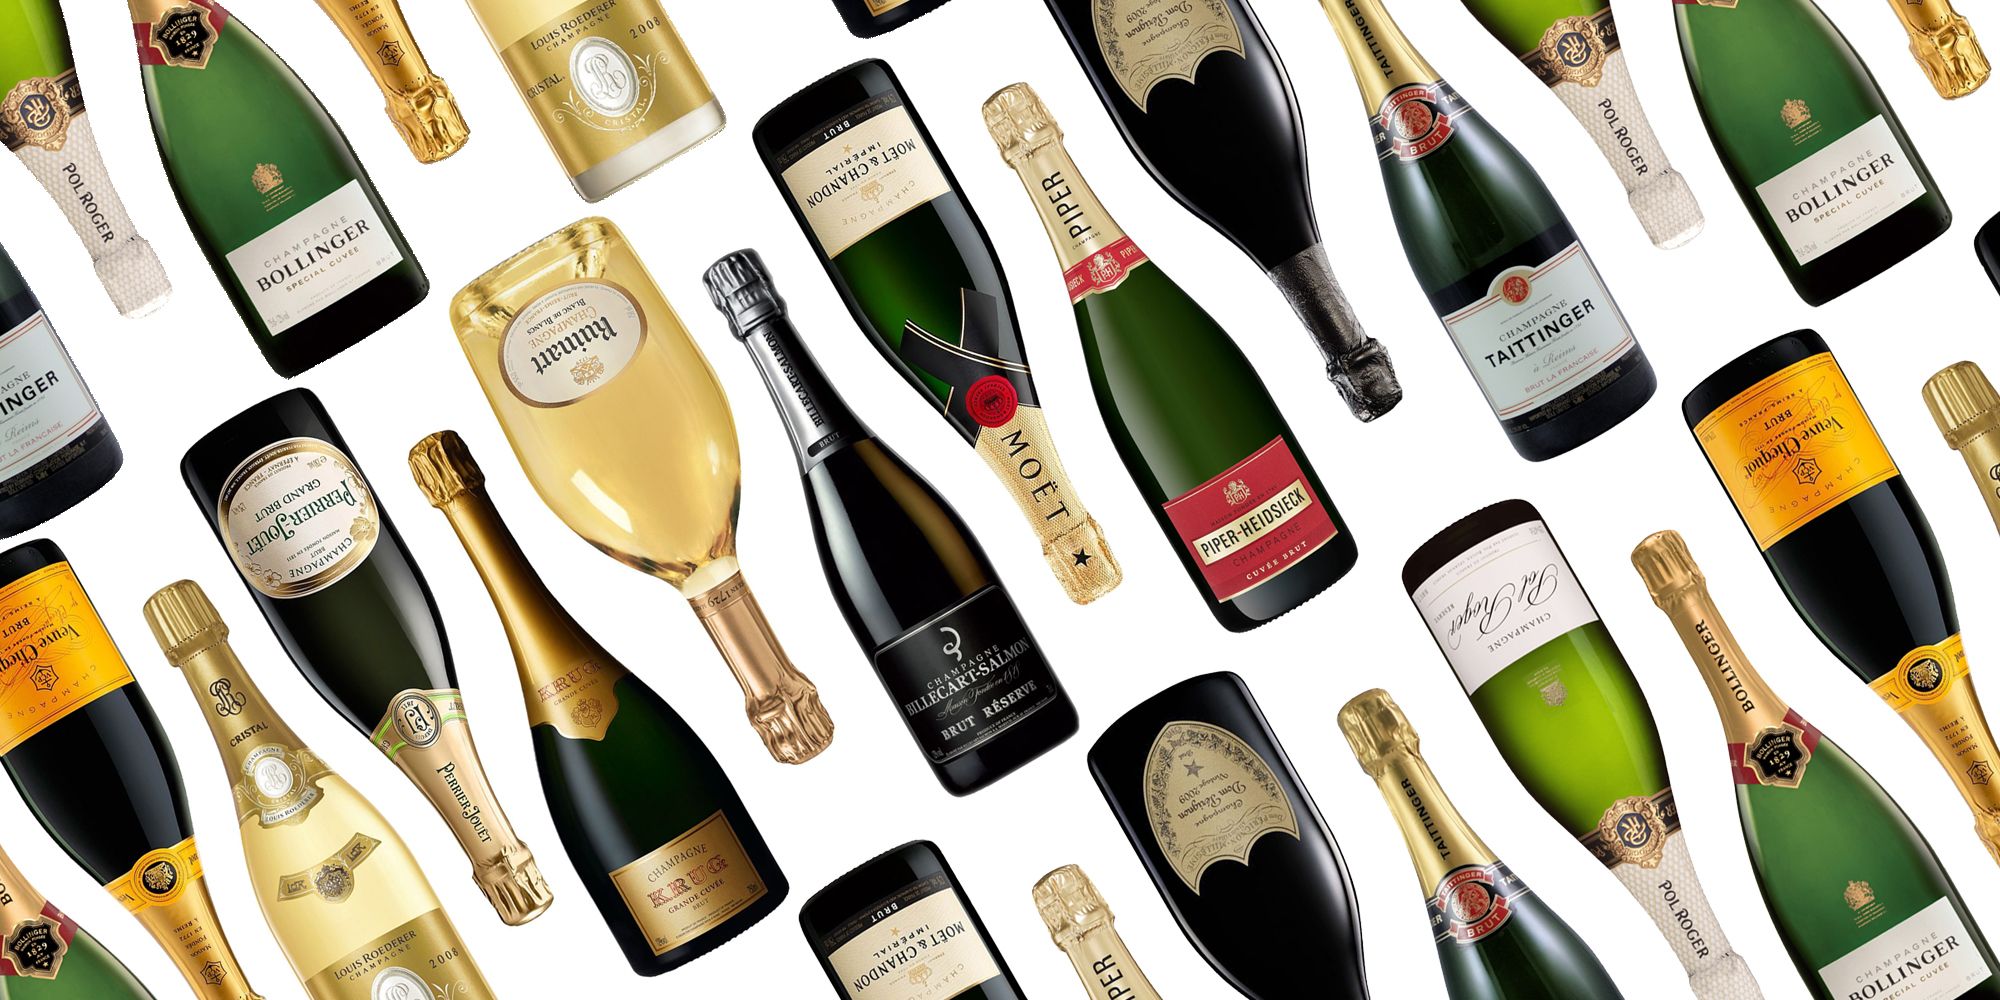 Moët Hennessy could run out of champagne